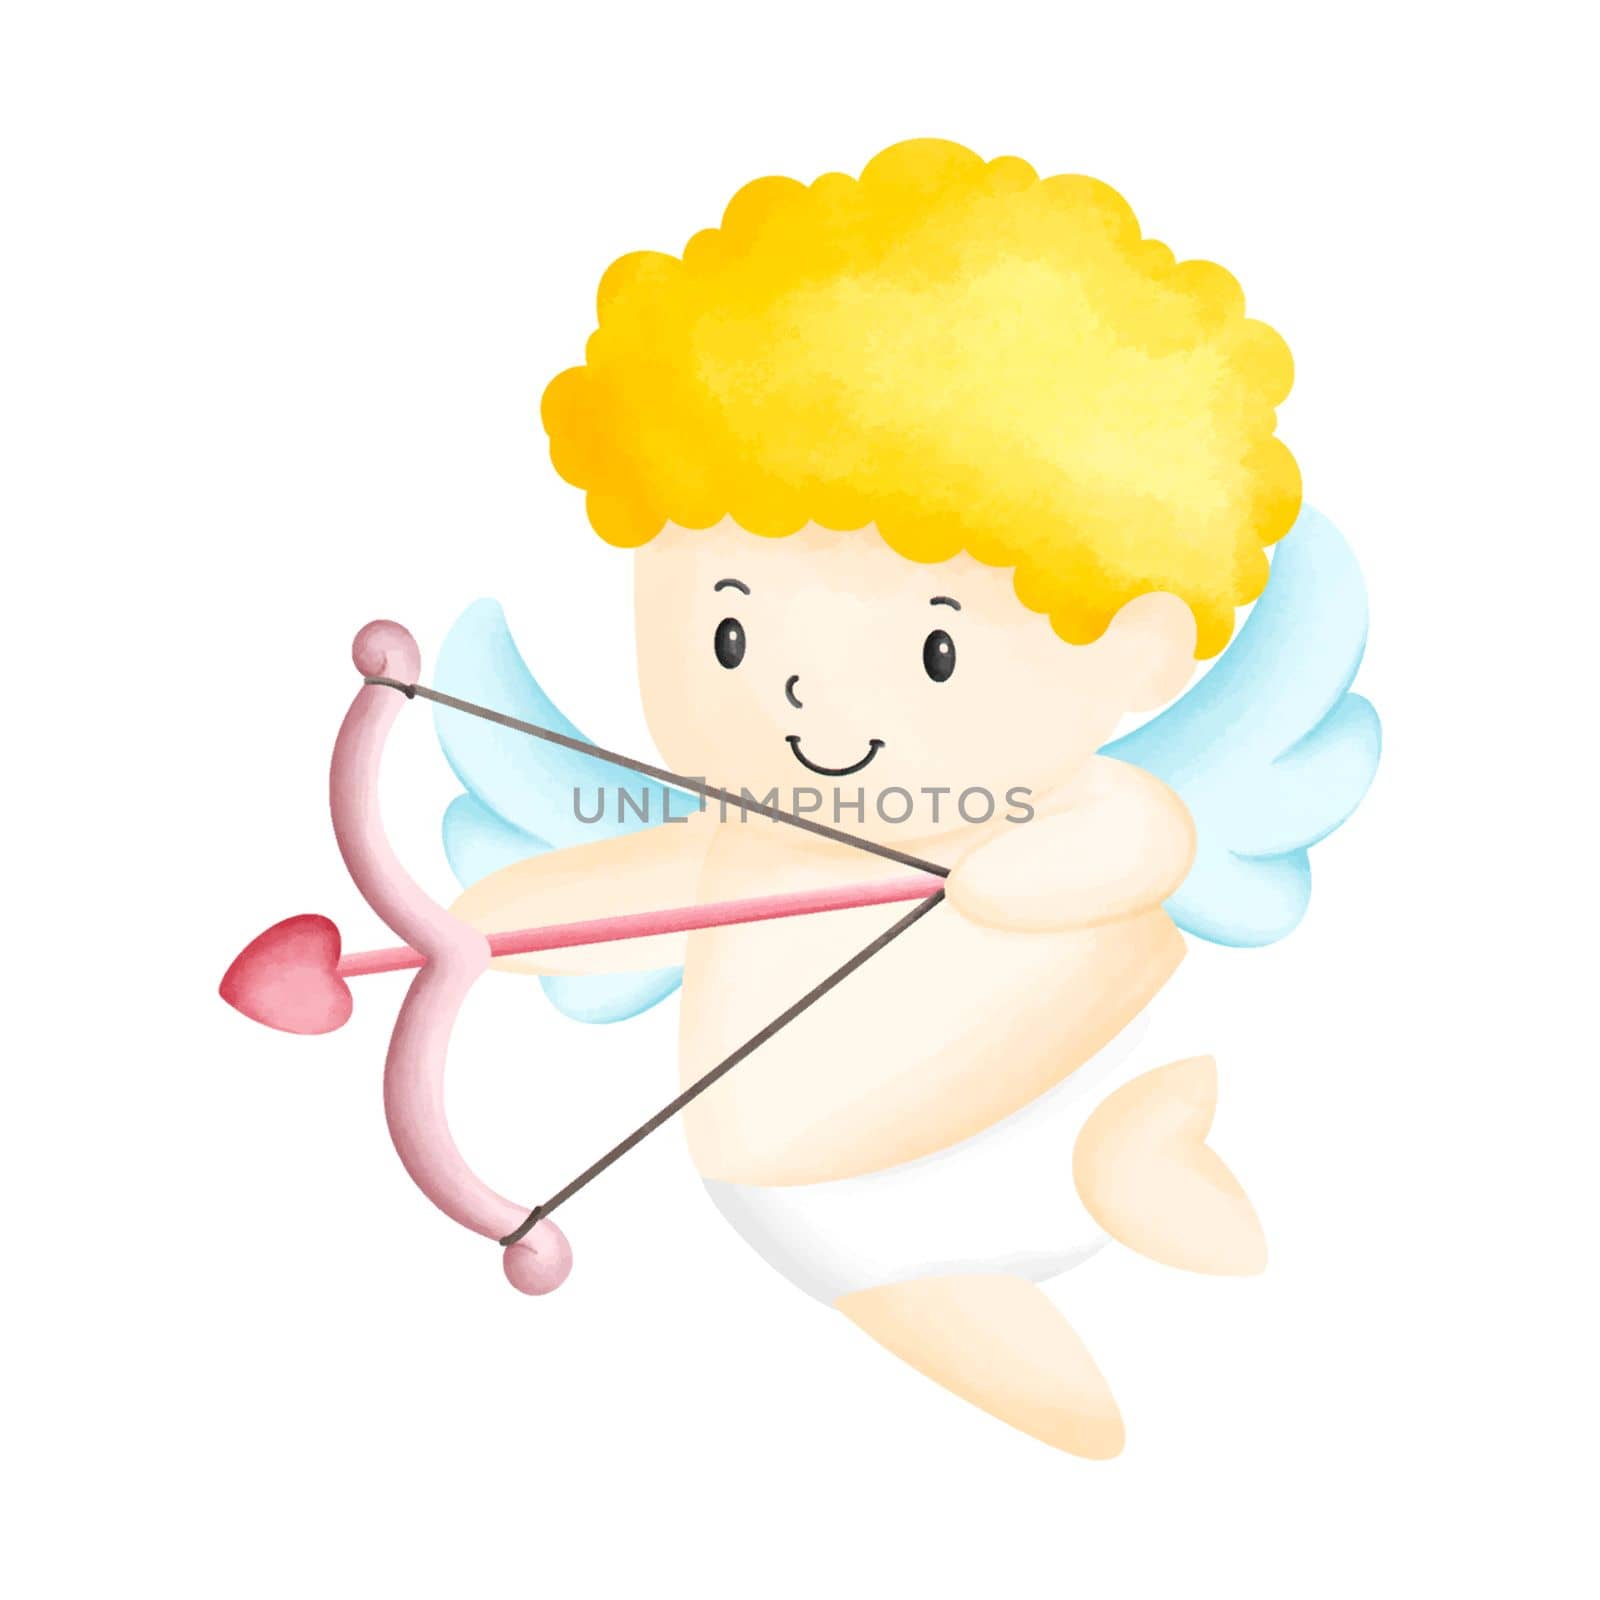 Love Cupid Cute Watercolor Clipart PNG. Paris In Love with lovely cupid holding love arrow for lovers, couple, wedding, Valentine watercolor illustration.